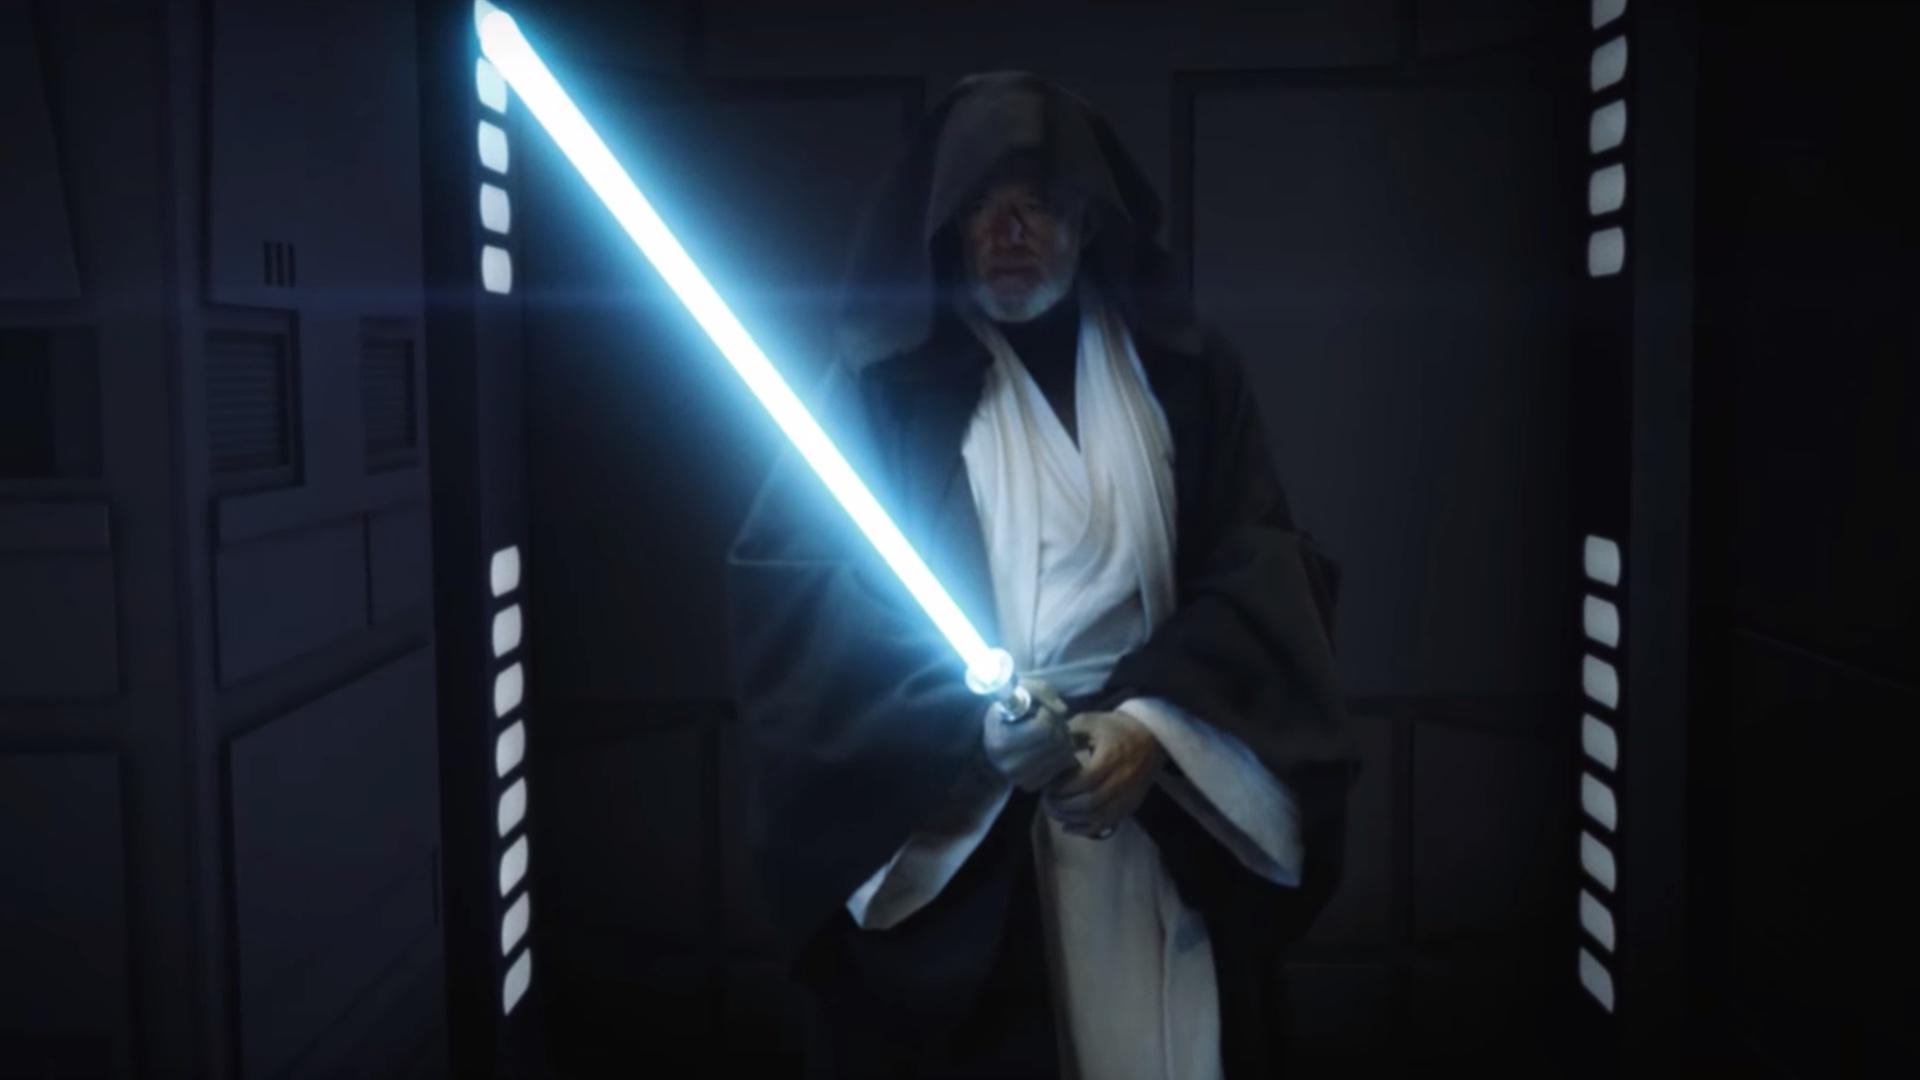 Stunning Reimagining Of The Climactic Lightsaber Duel Between Darth Vader And Obi Wan Kenobi In A NEW HOPE